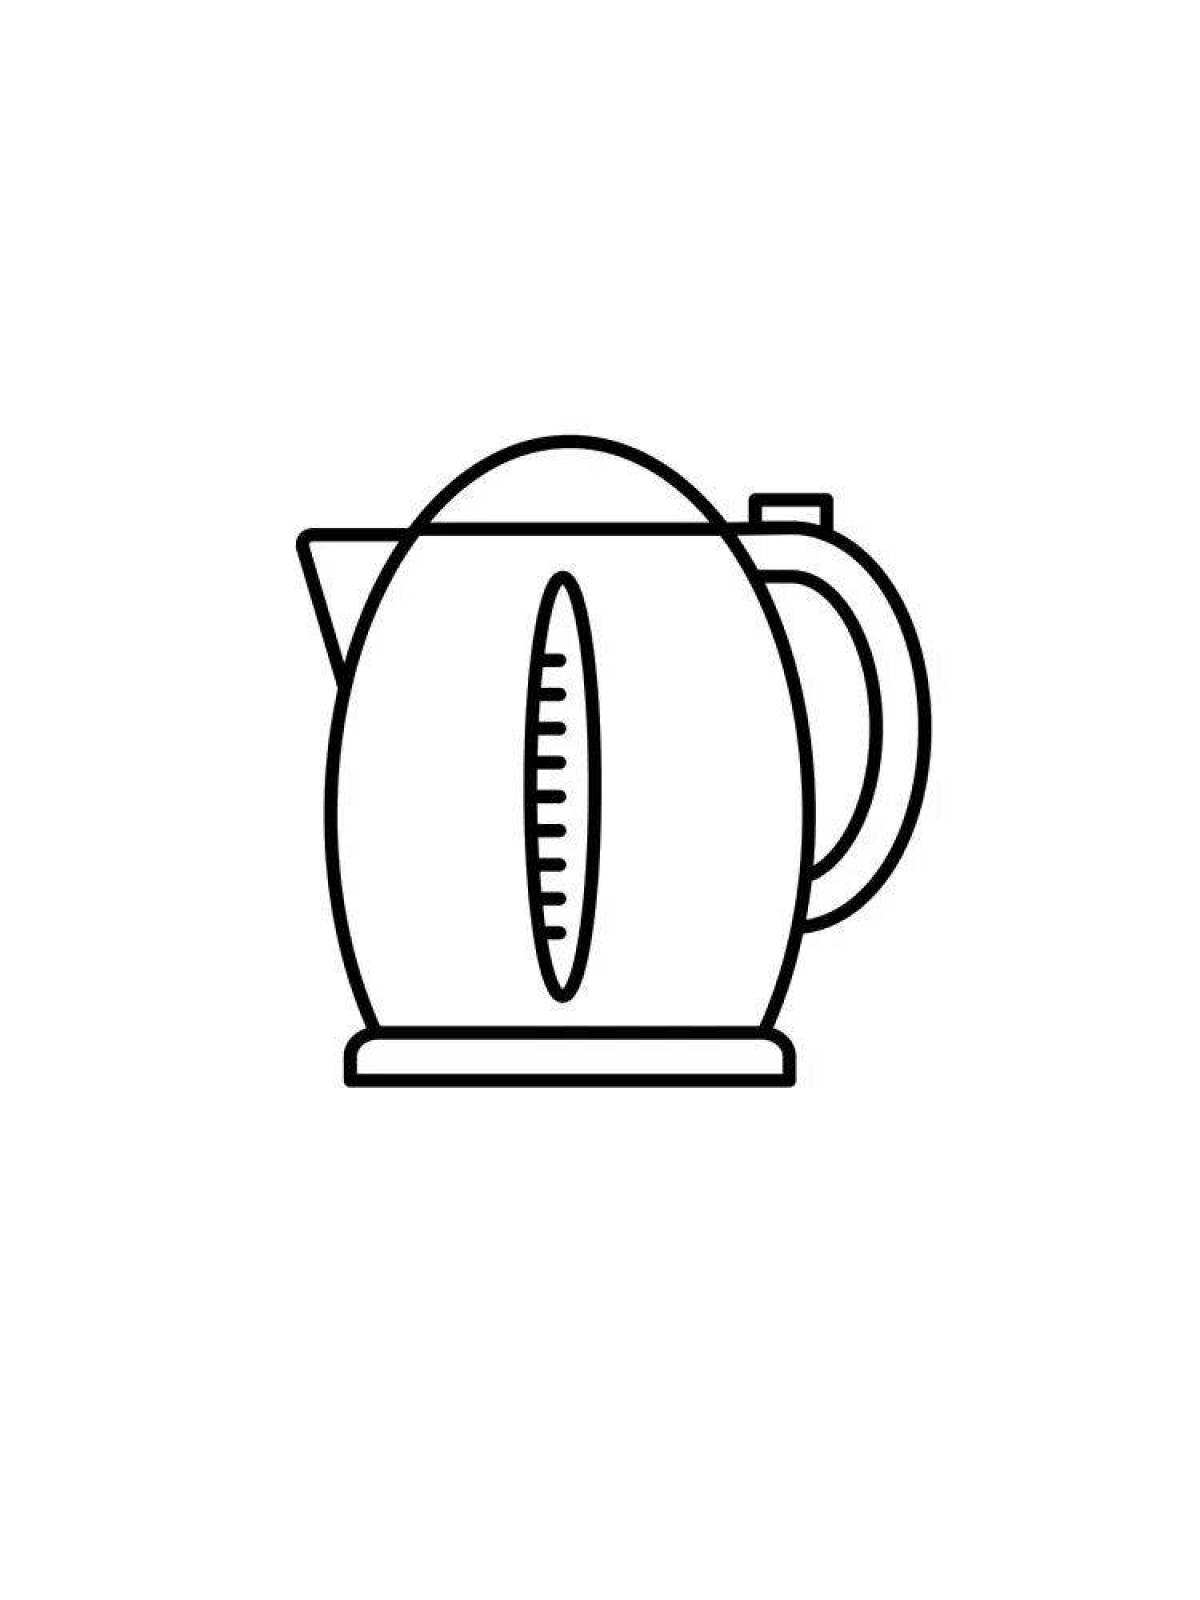 Electric kettle #20